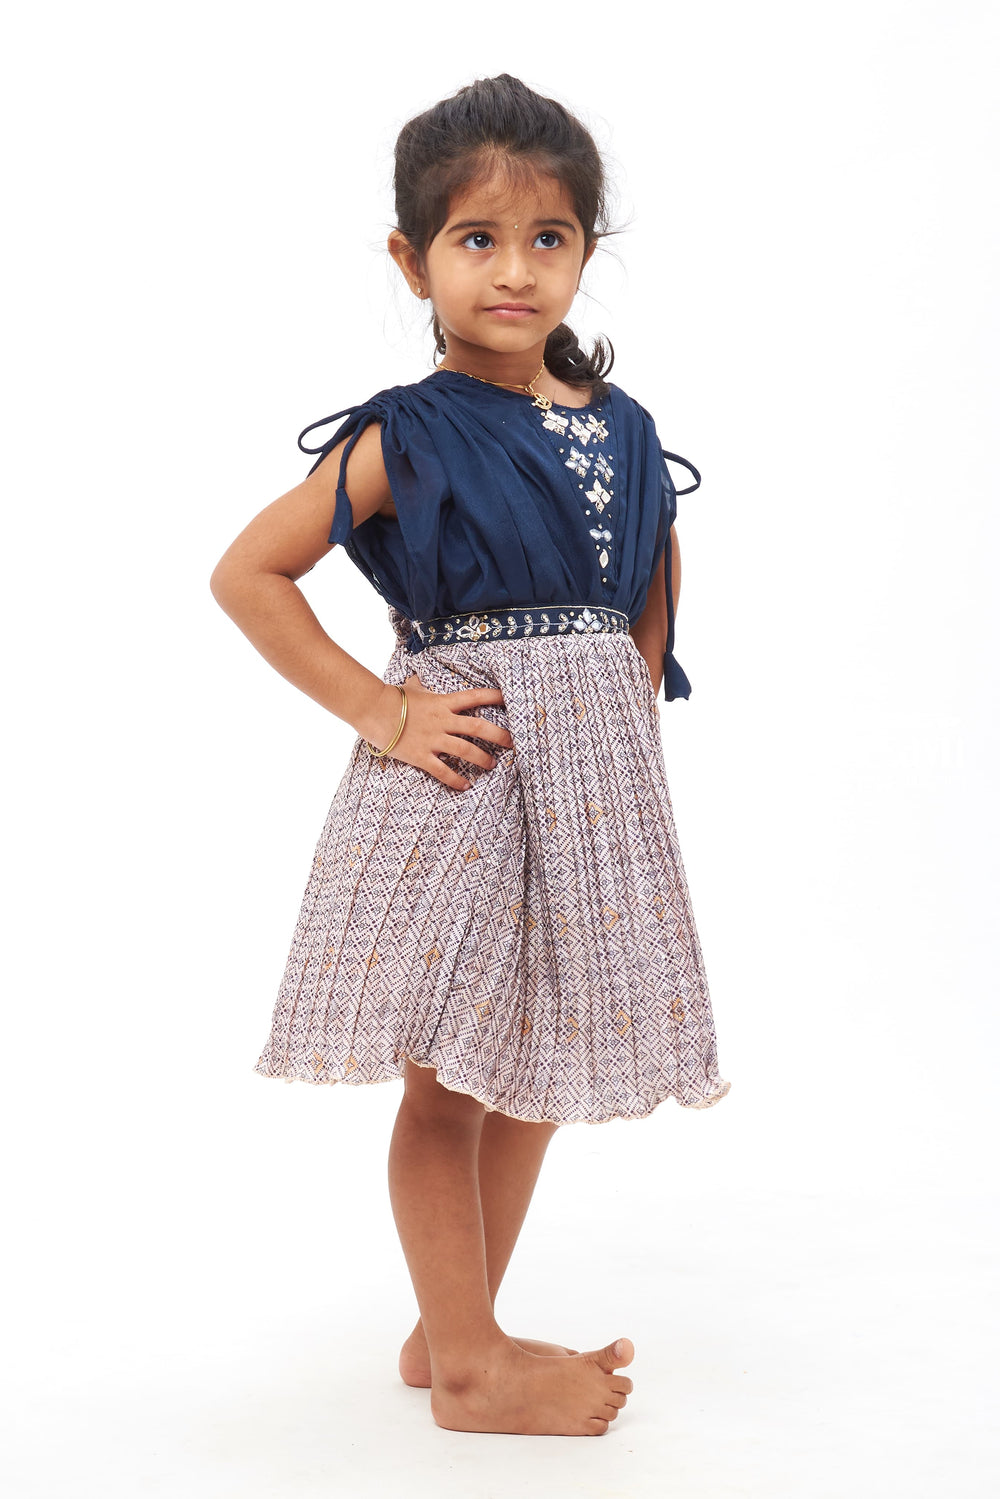 The Nesavu Girls Fancy Party Frock Navy Blue Mirror Embroidered Geometrical Print with Poncho Sleeves Party Frock Nesavu Mirror Embroidered Frock | Geometrical Print with Poncho Sleeves for Girls | The Nesavu